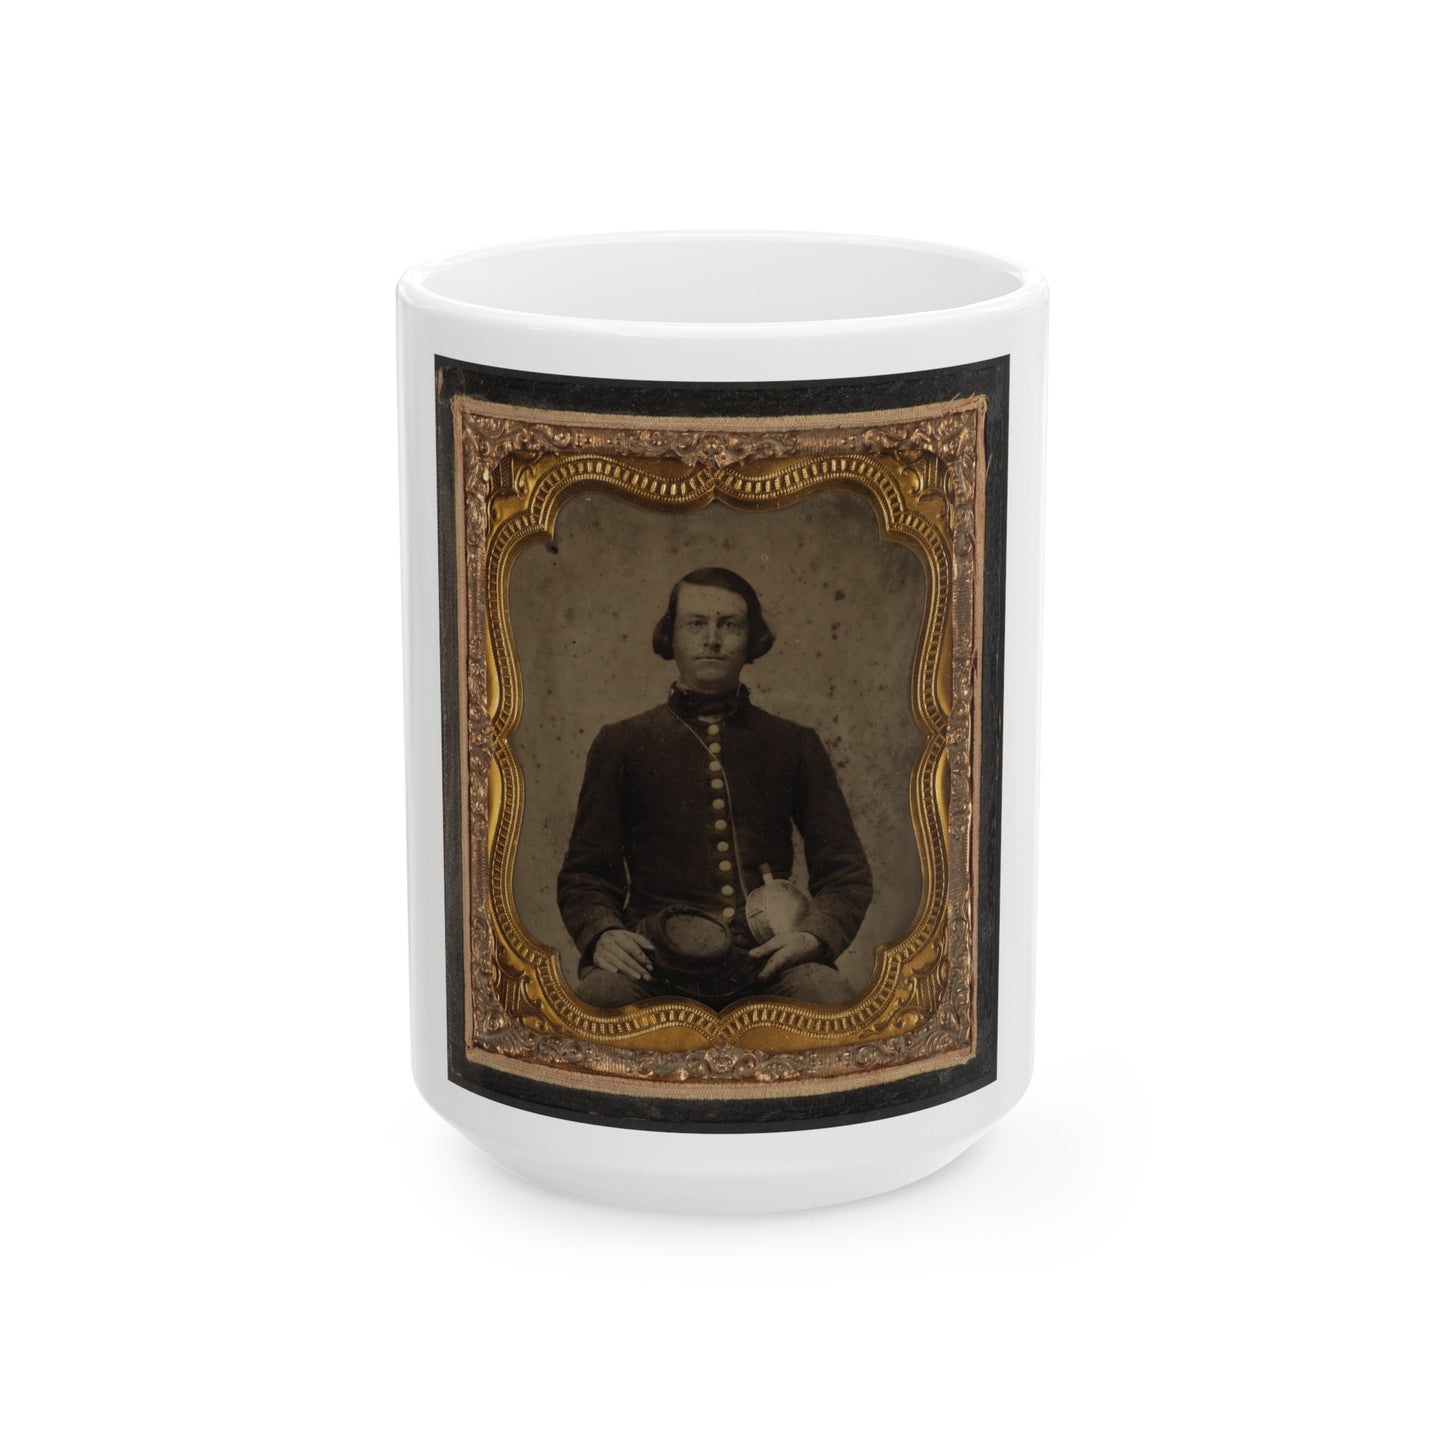 Private Amos Guise Of Co. H, 3rd South Carolina Infantry Regiment, In Uniform With Canteen (U.S. Civil War) White Coffee Mug